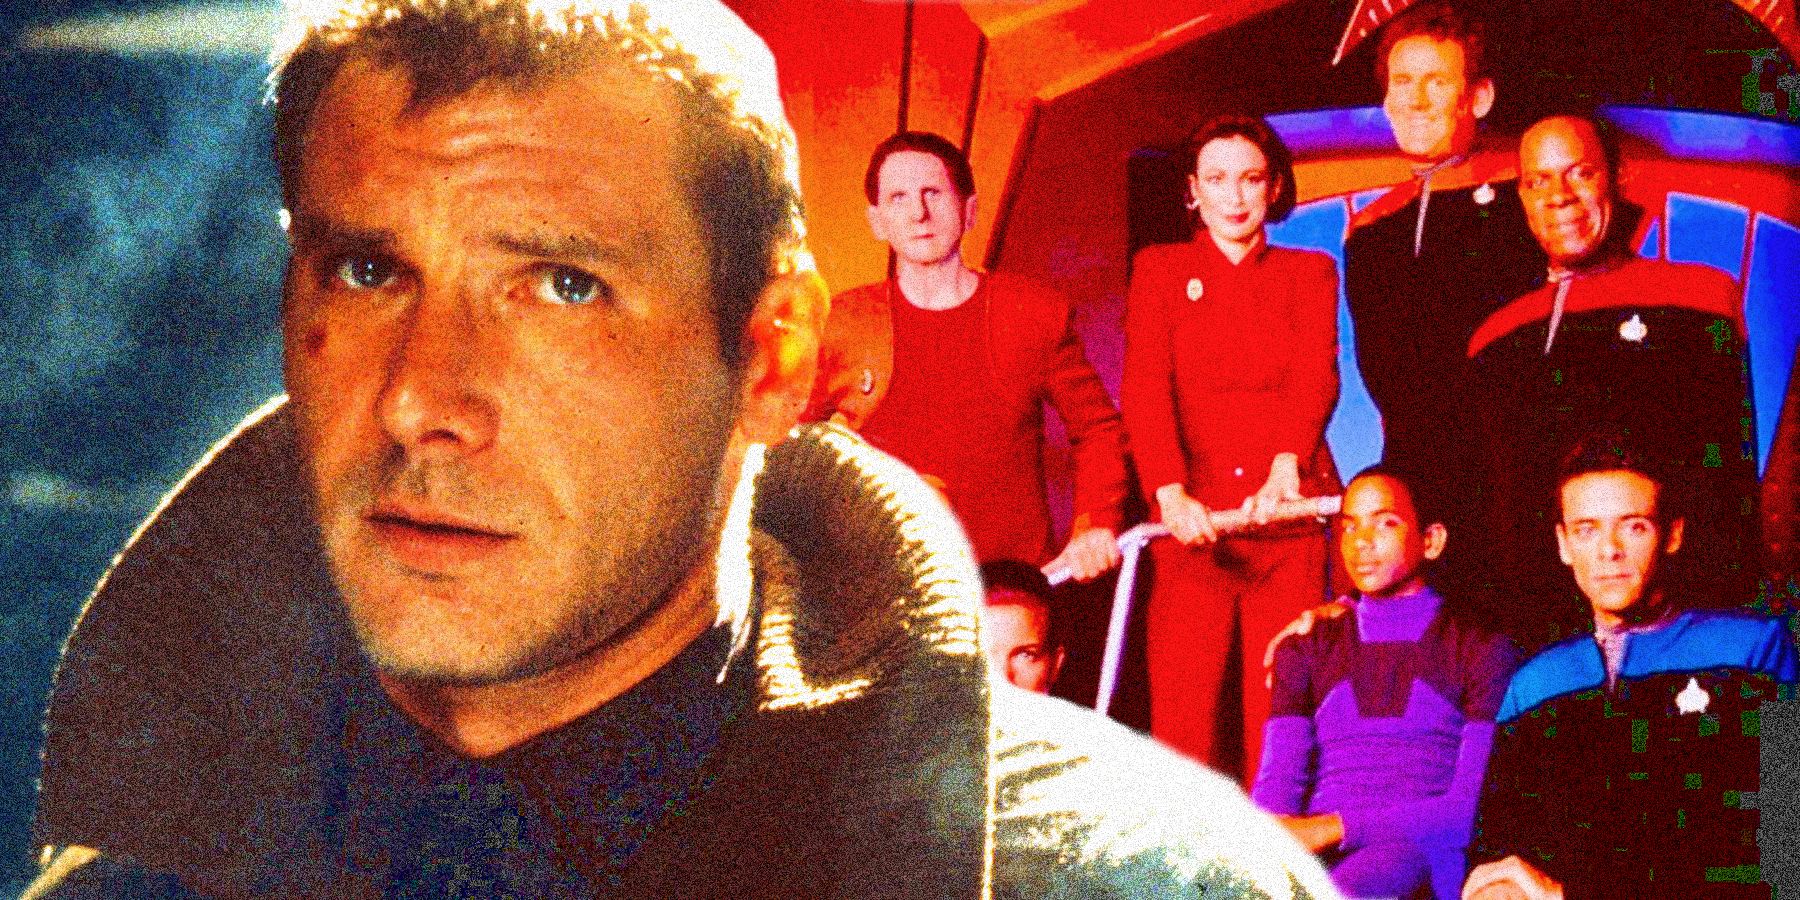 Harrison Ford as Rick Deckard and the cast of Star Trek: DS9